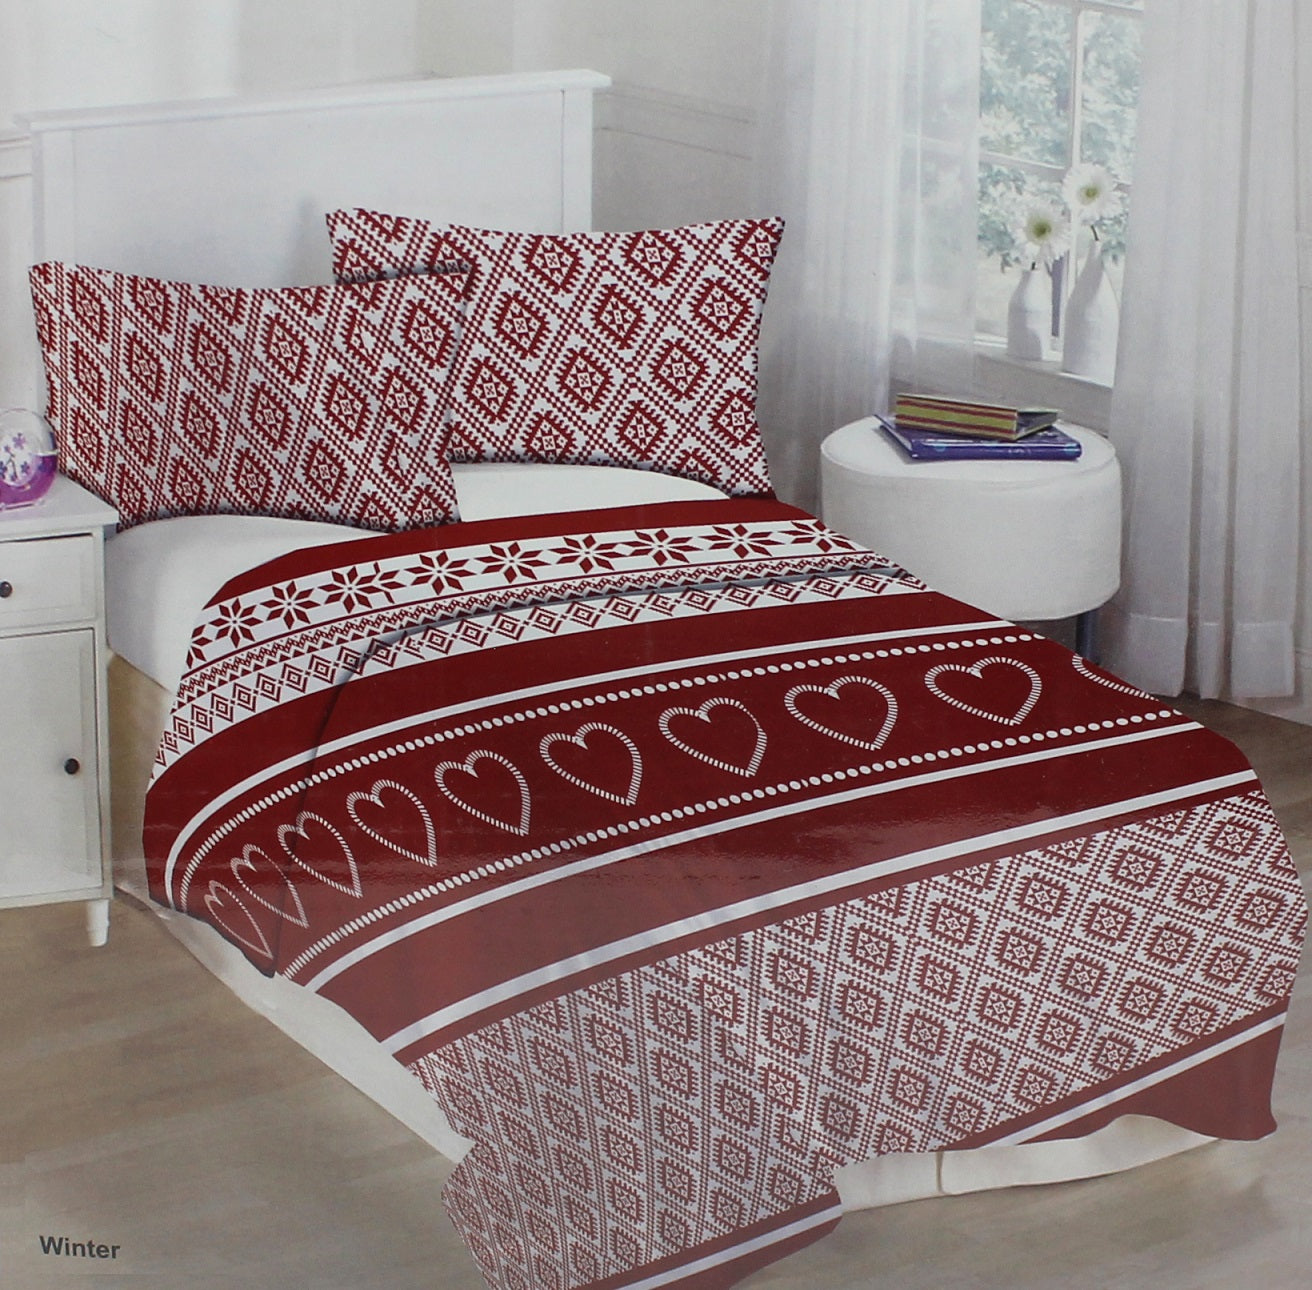 Flannelette Nordic Snowflakes Duvet Cover Brushed King